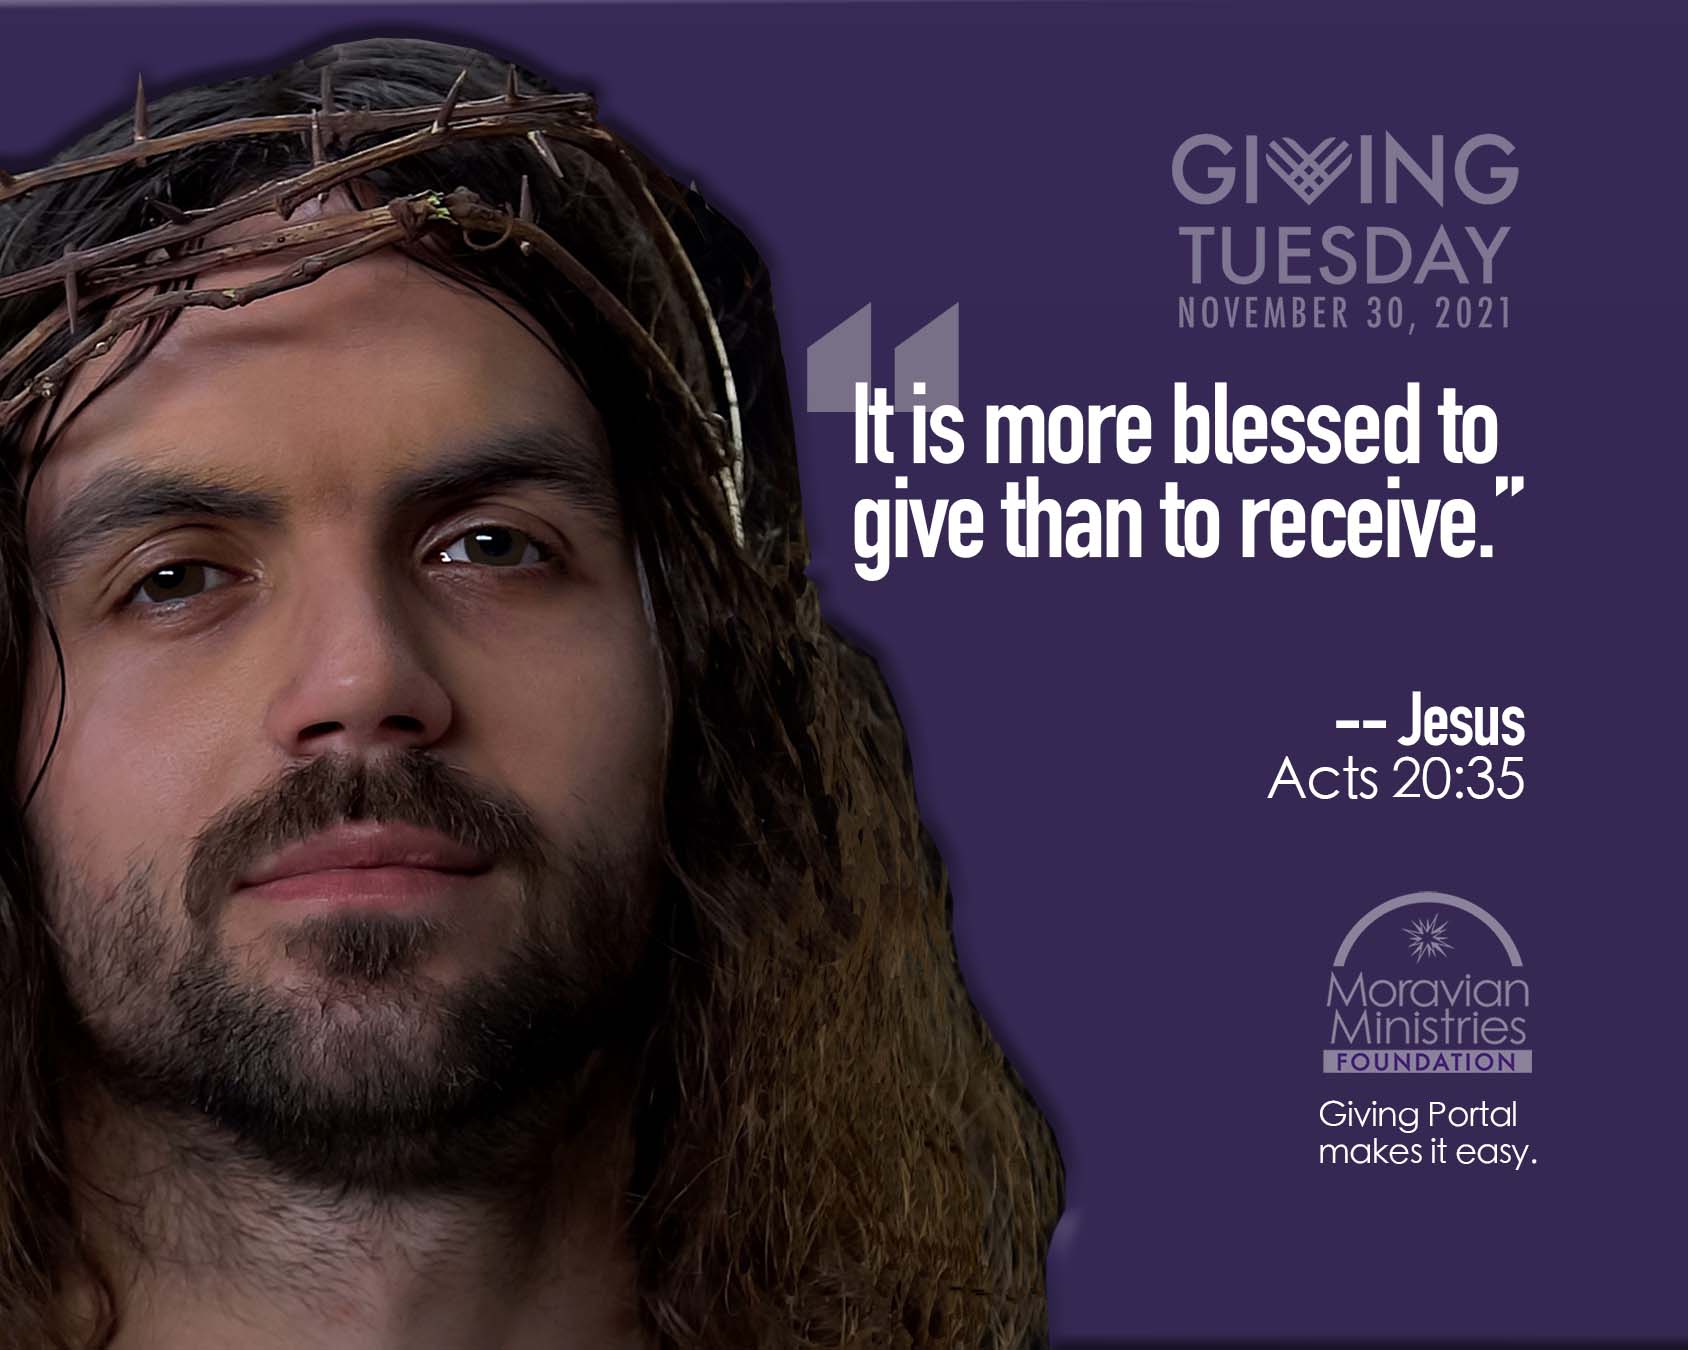 Jesus saying "It is more blessed to give than to receive." Giving Tuesday. Moravian Giving Portal.